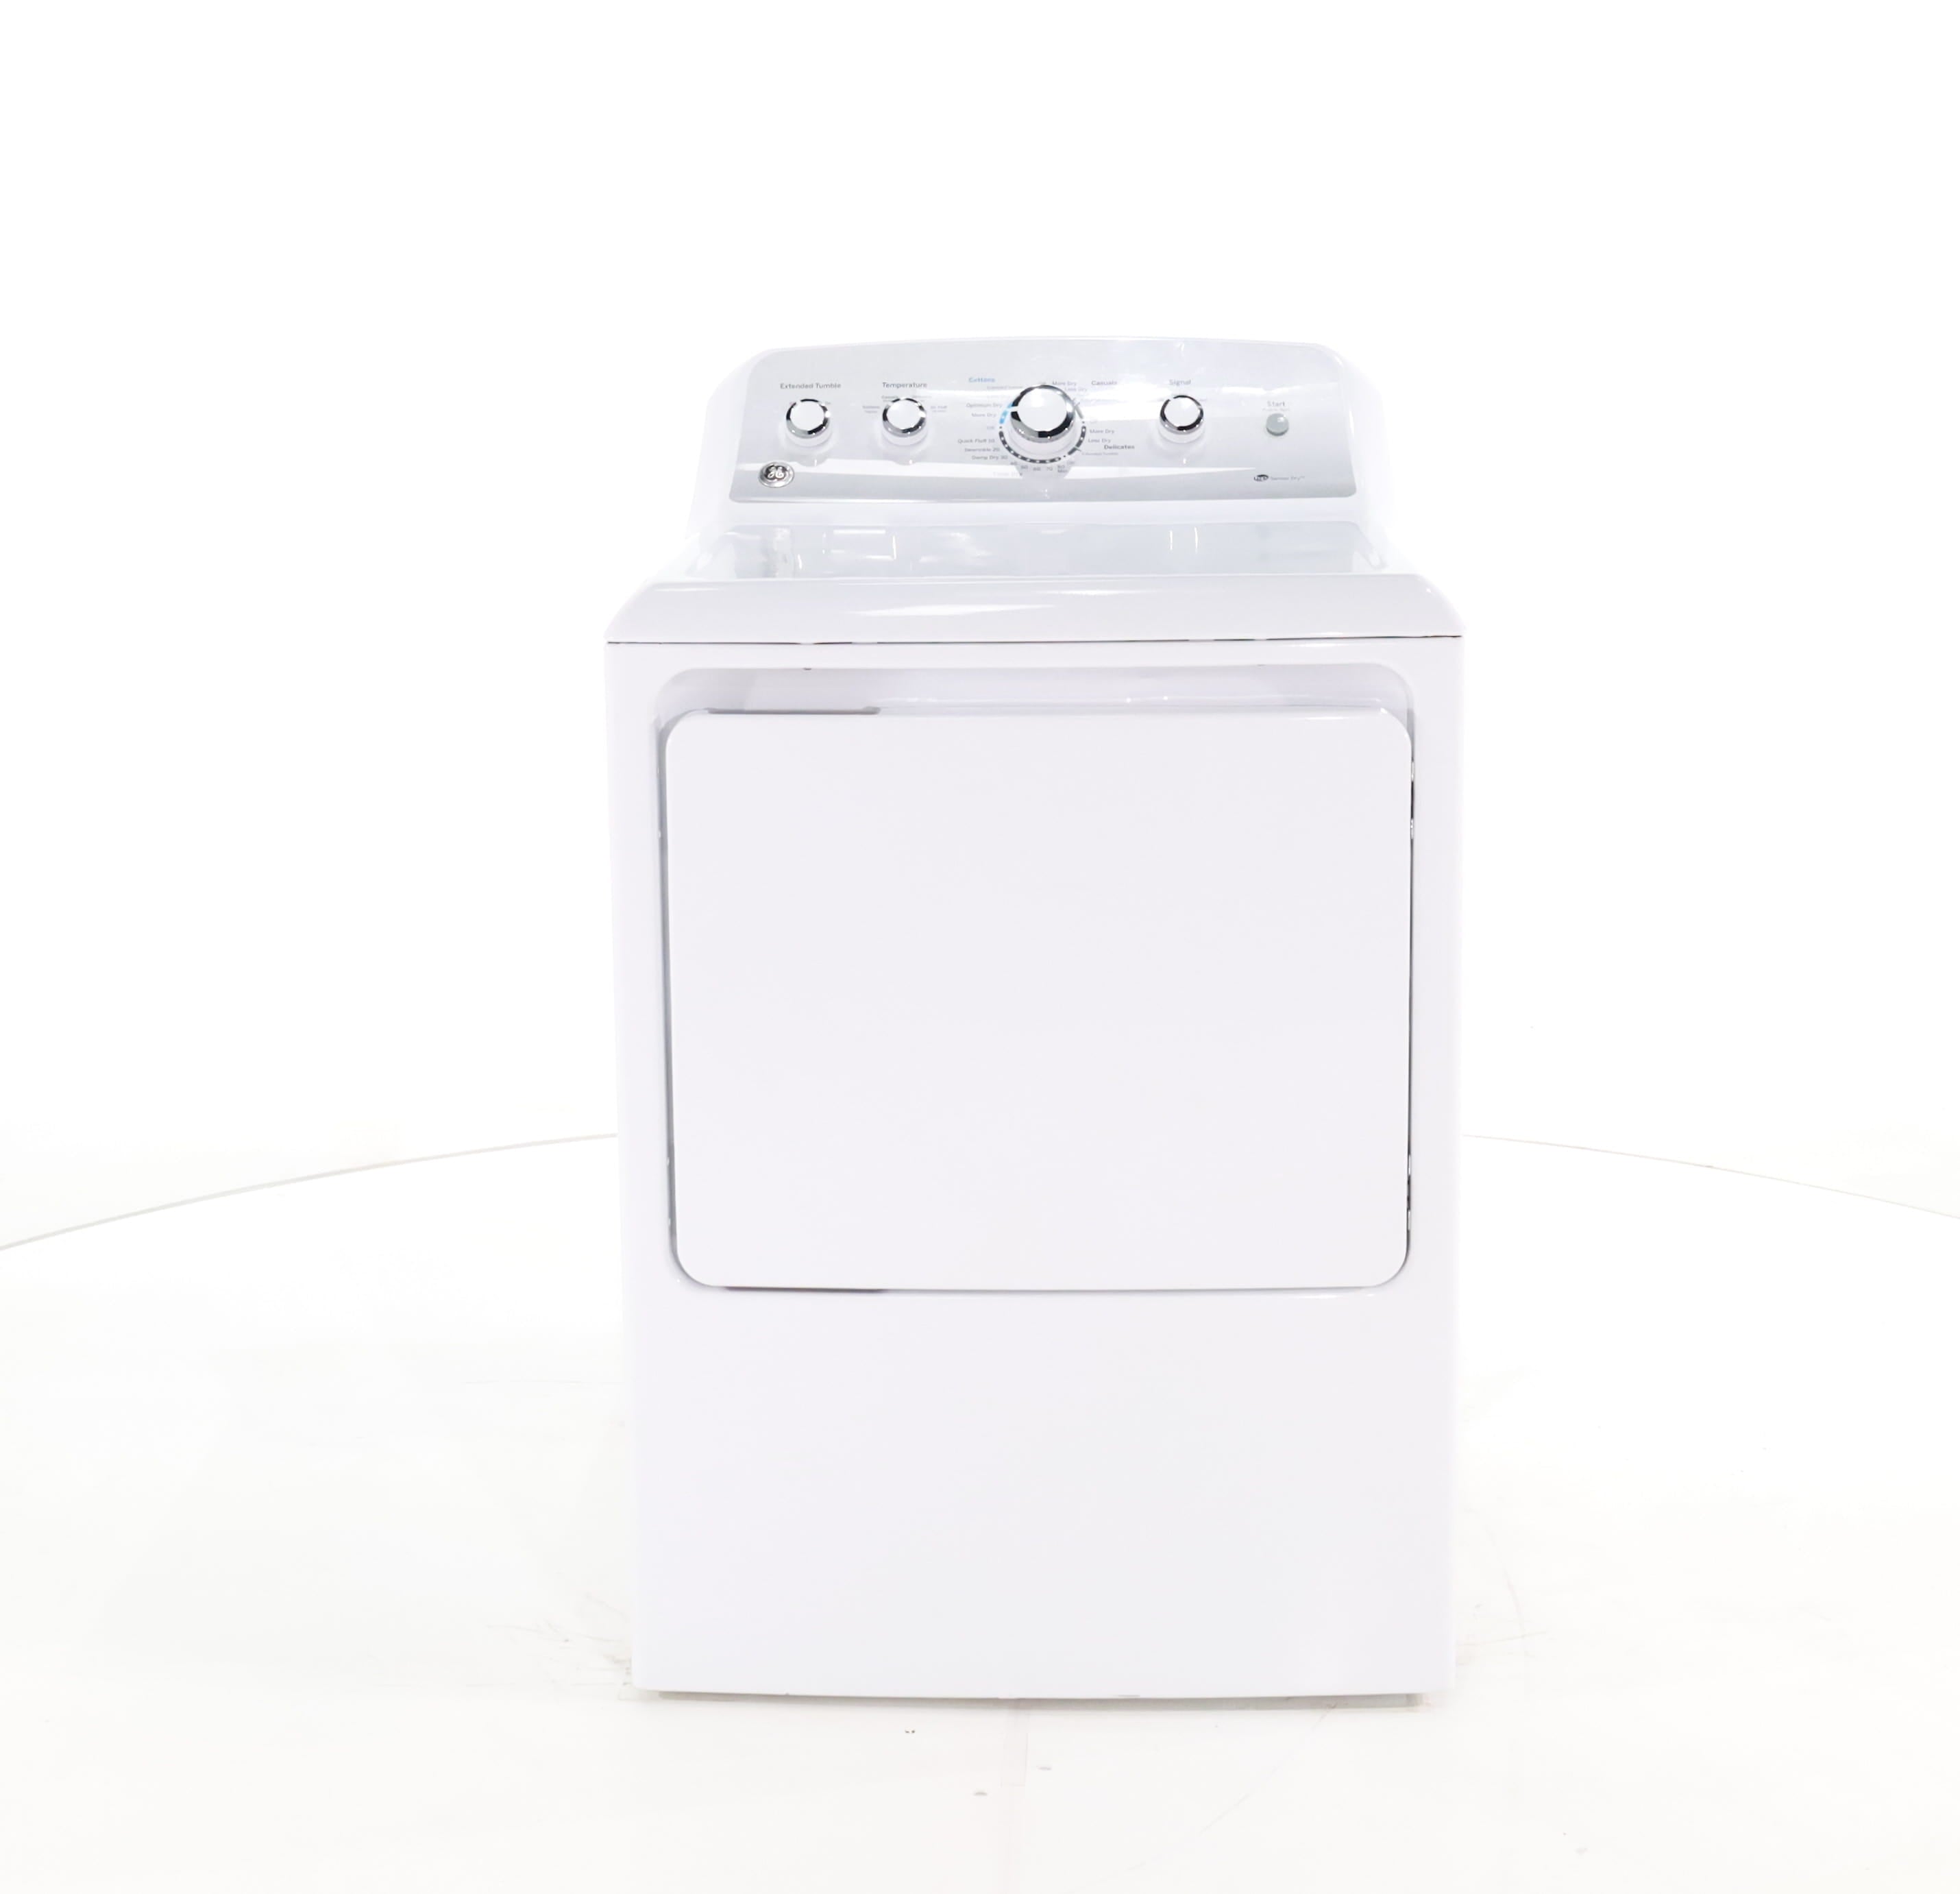 Pictures of HE GE 7.2 cu. ft. Electric Dryer with HE Sensor Dry- Certified Refurbished - Neu Appliance Outlet - Discount Appliance Outlet in Austin, Tx